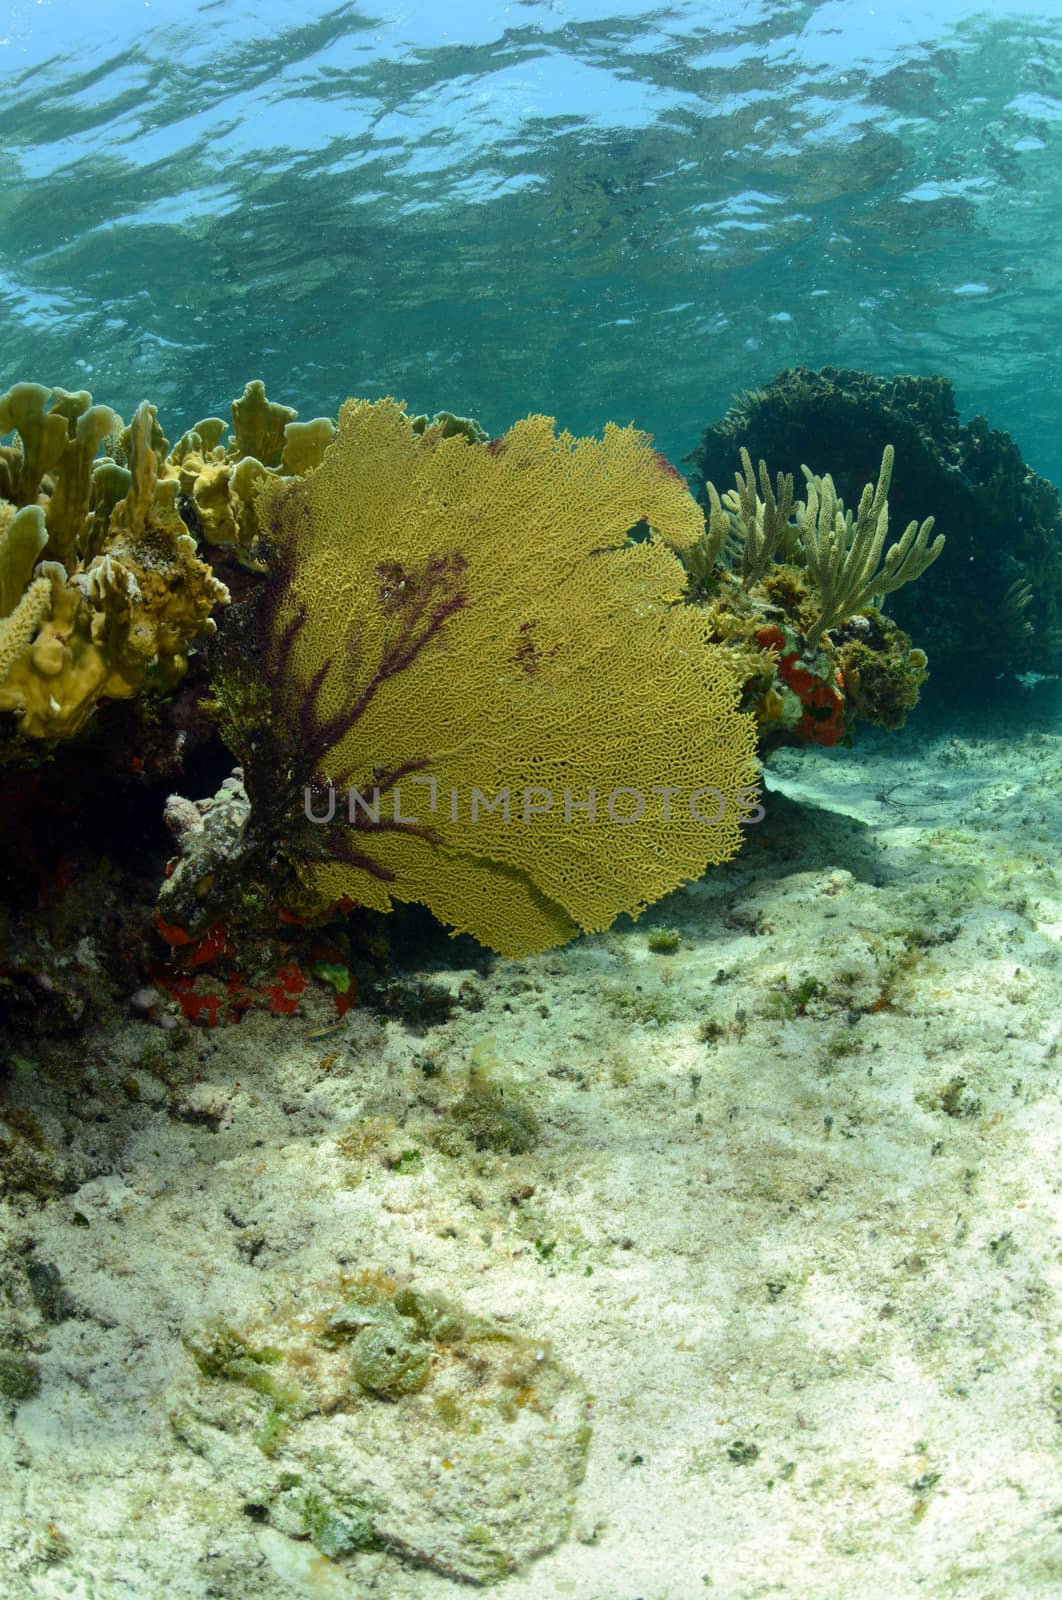 Vibrant sea fan and coral in natural Caribbean seascape by ftlaudgirl